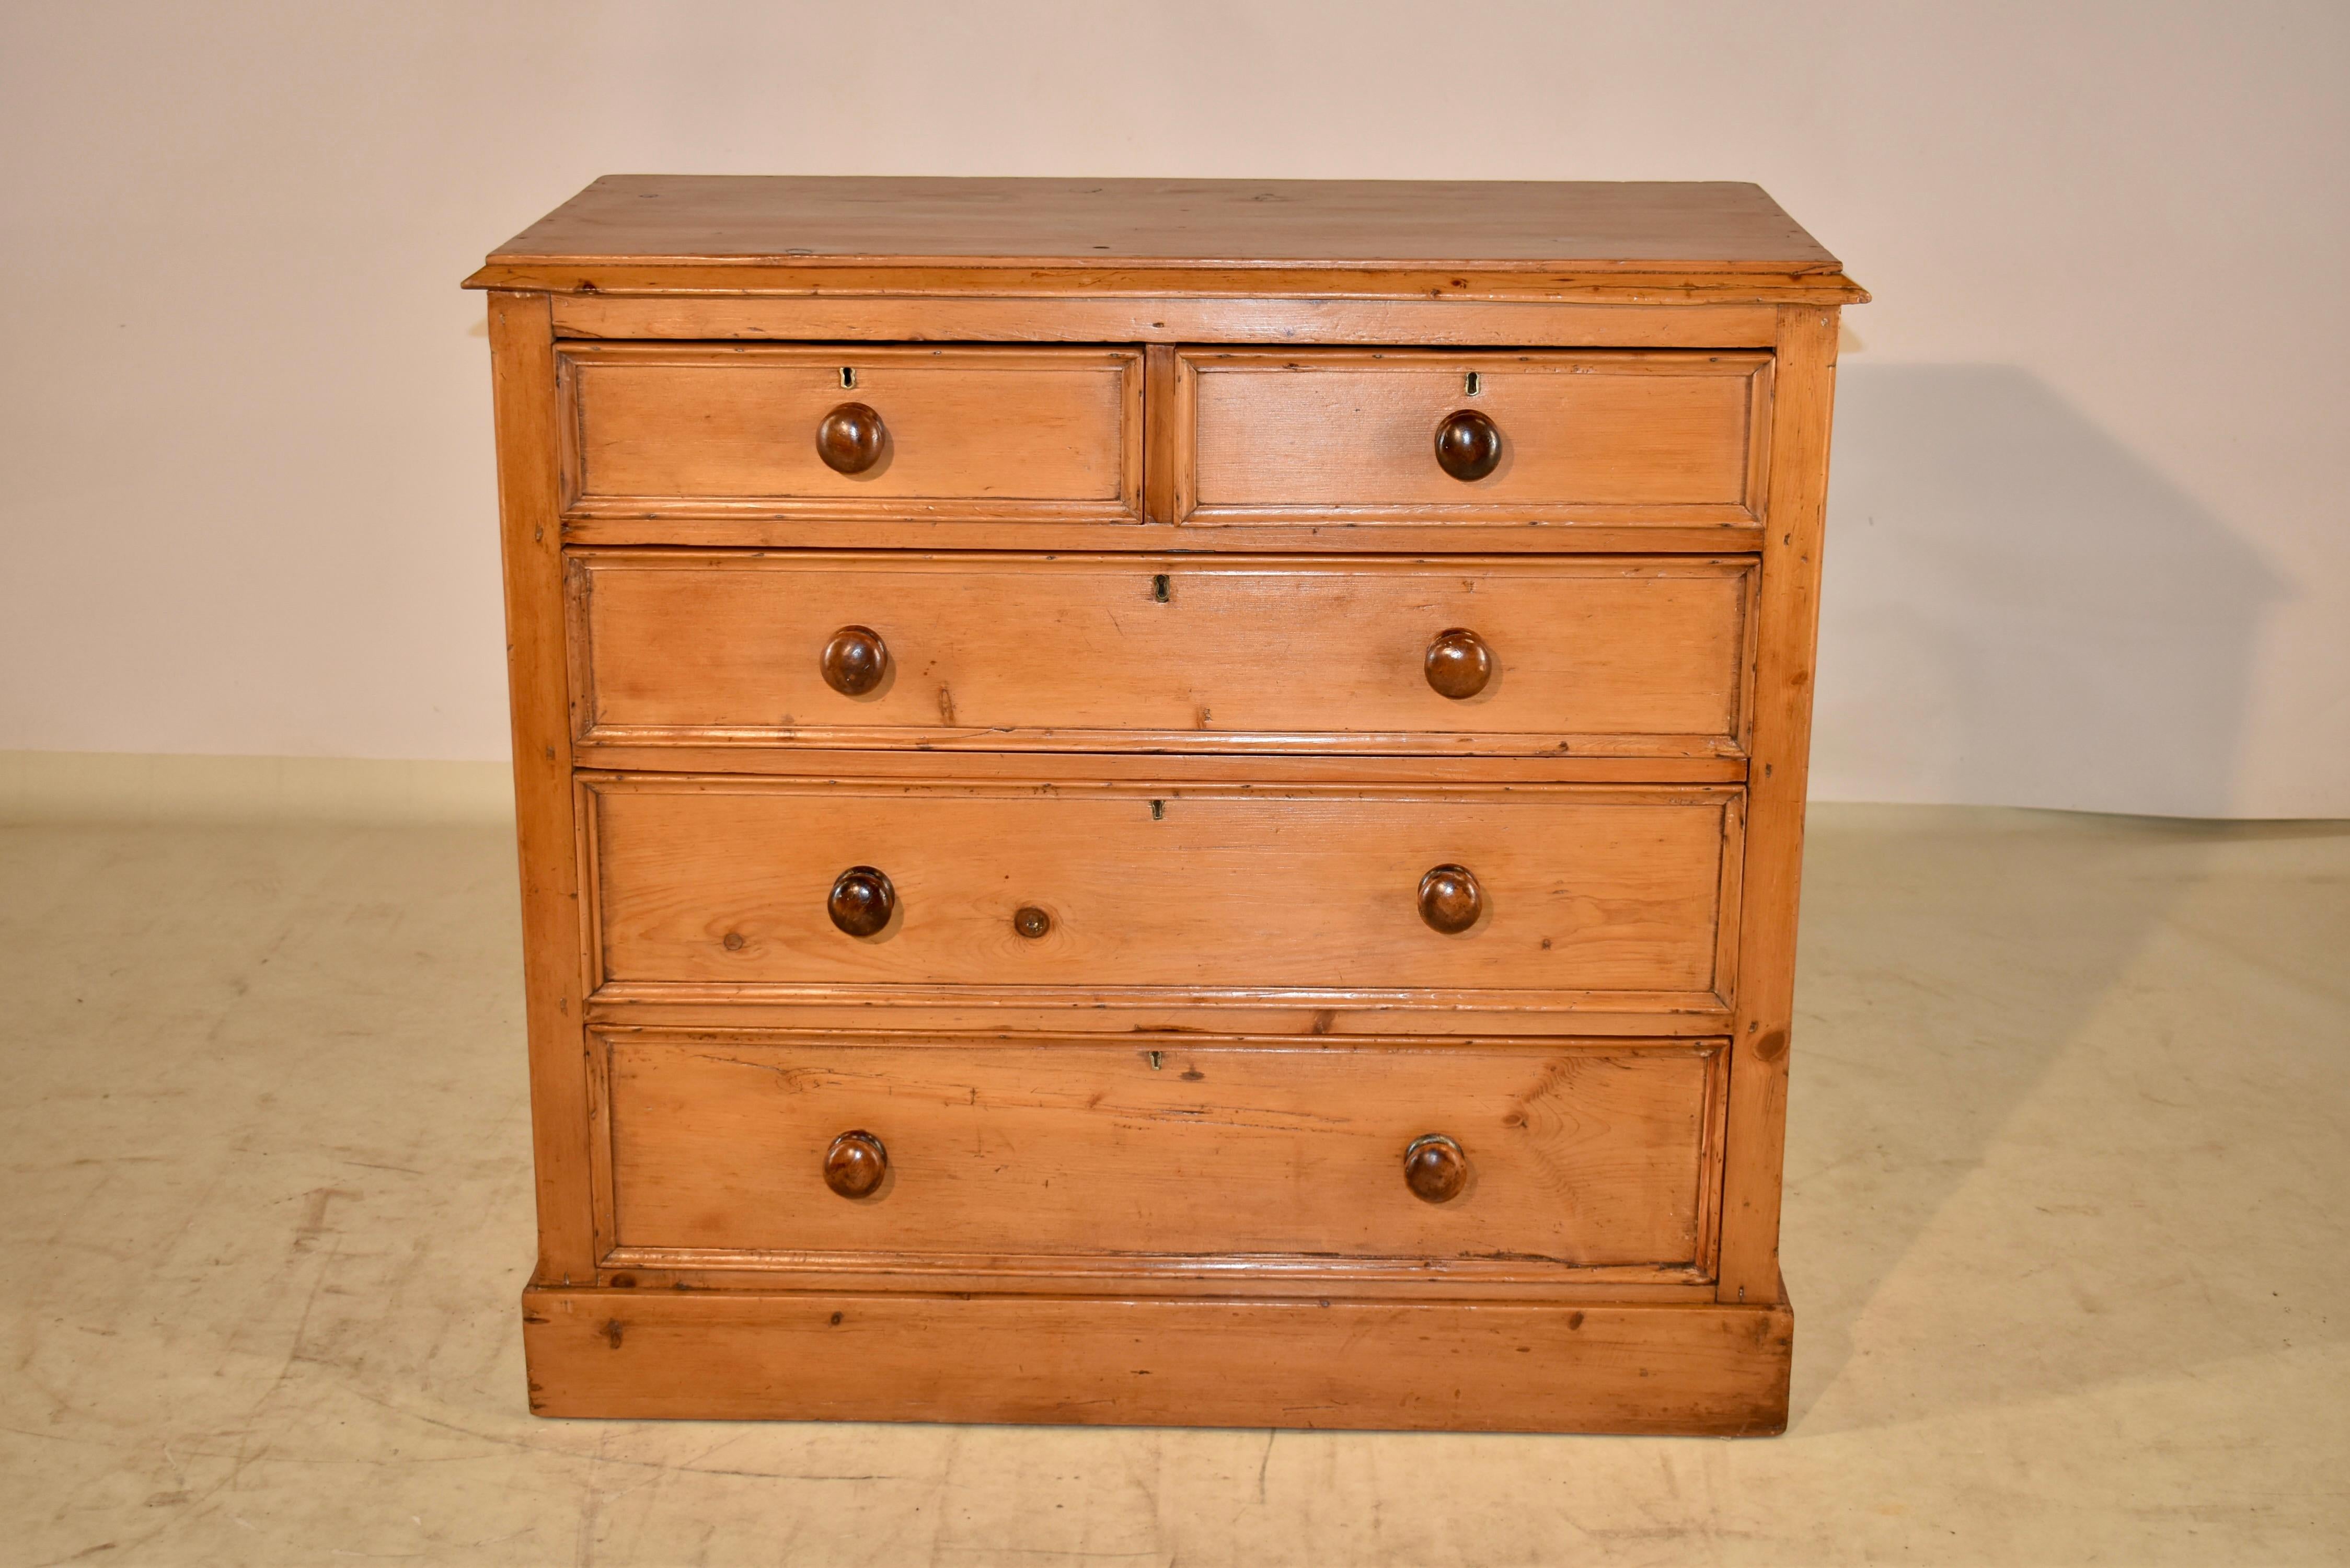 19th century pine chest of drawers from England. The top is made from a single board, and has a molded edge for added design flair. The case sides are simple, and has two drawers over three drawers, with molded drawer fronts. The case is finished